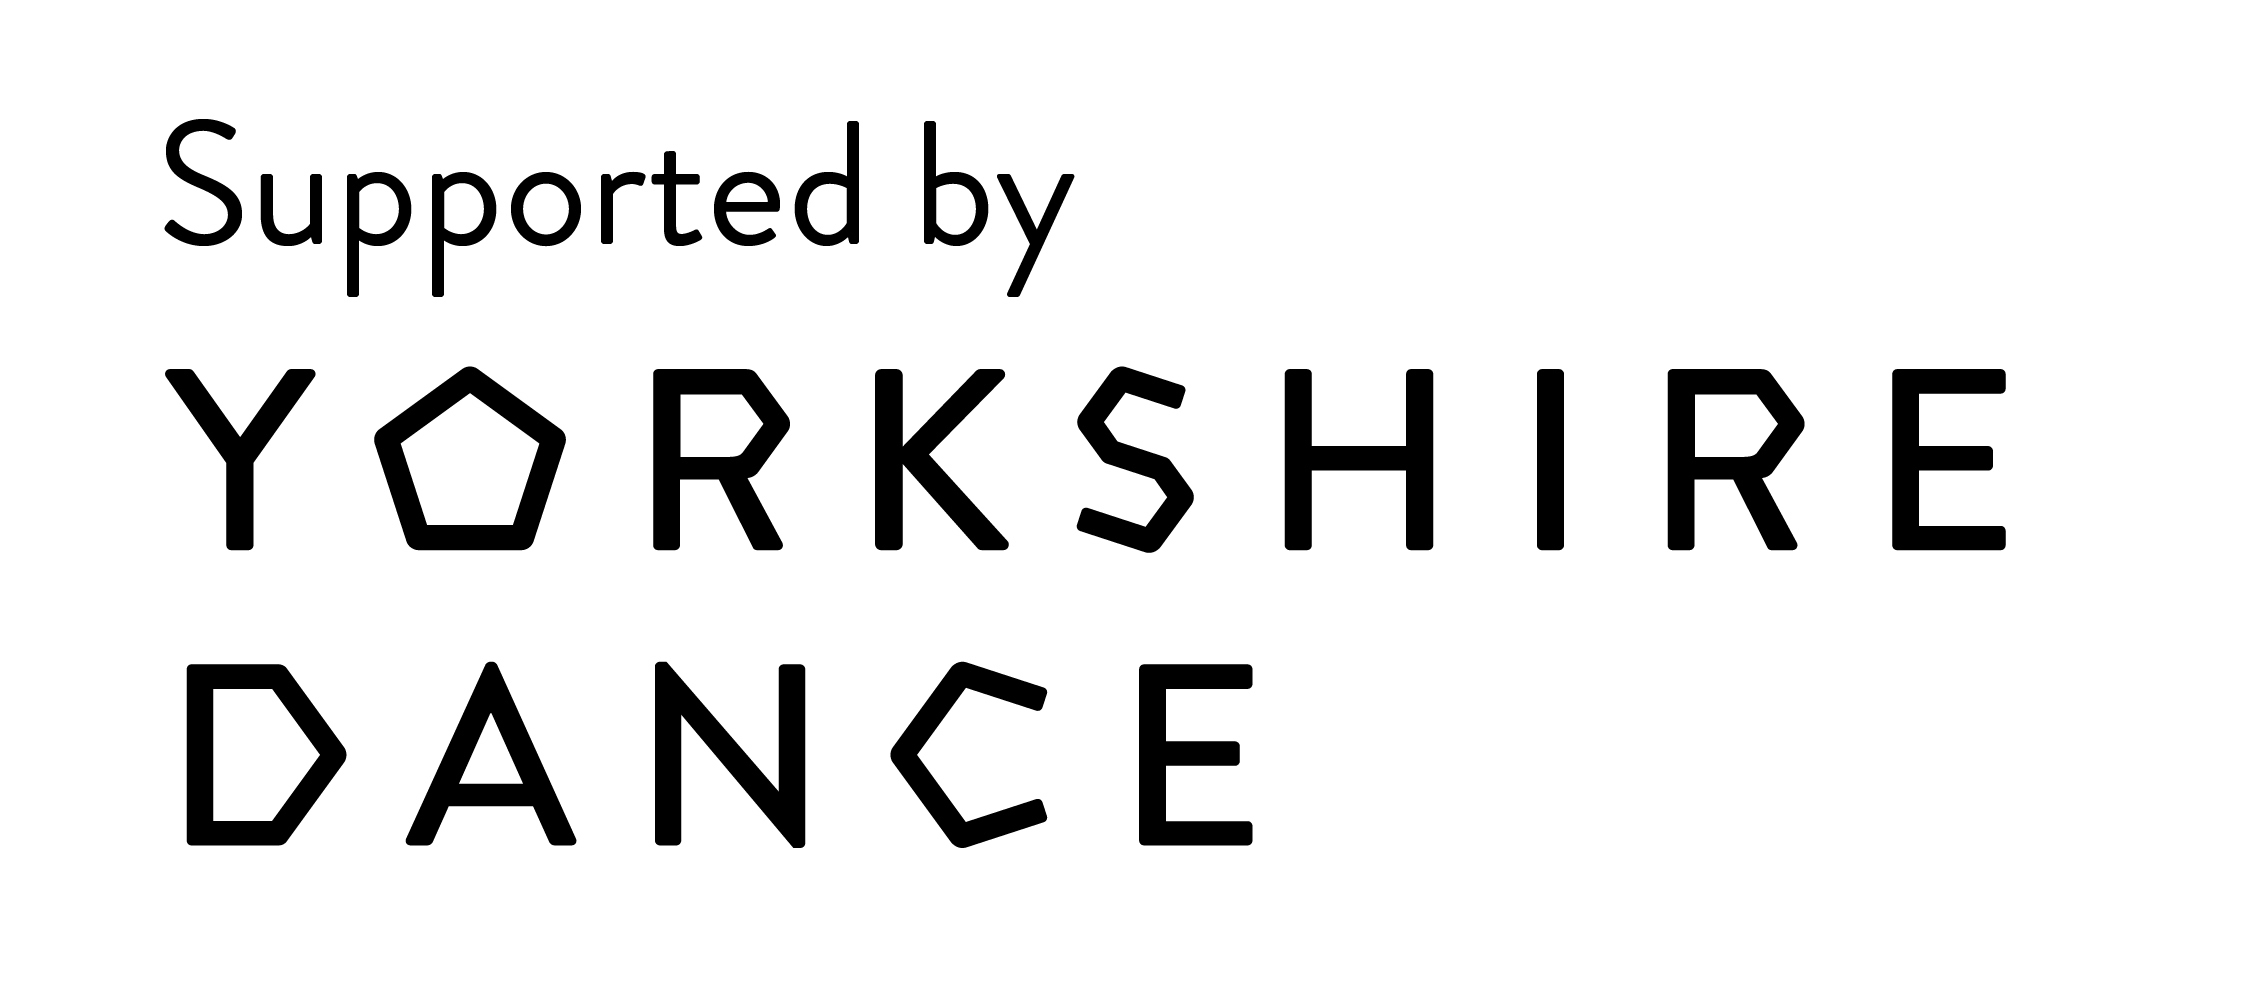 Supported by Yorkshire Dance - logo.jpg